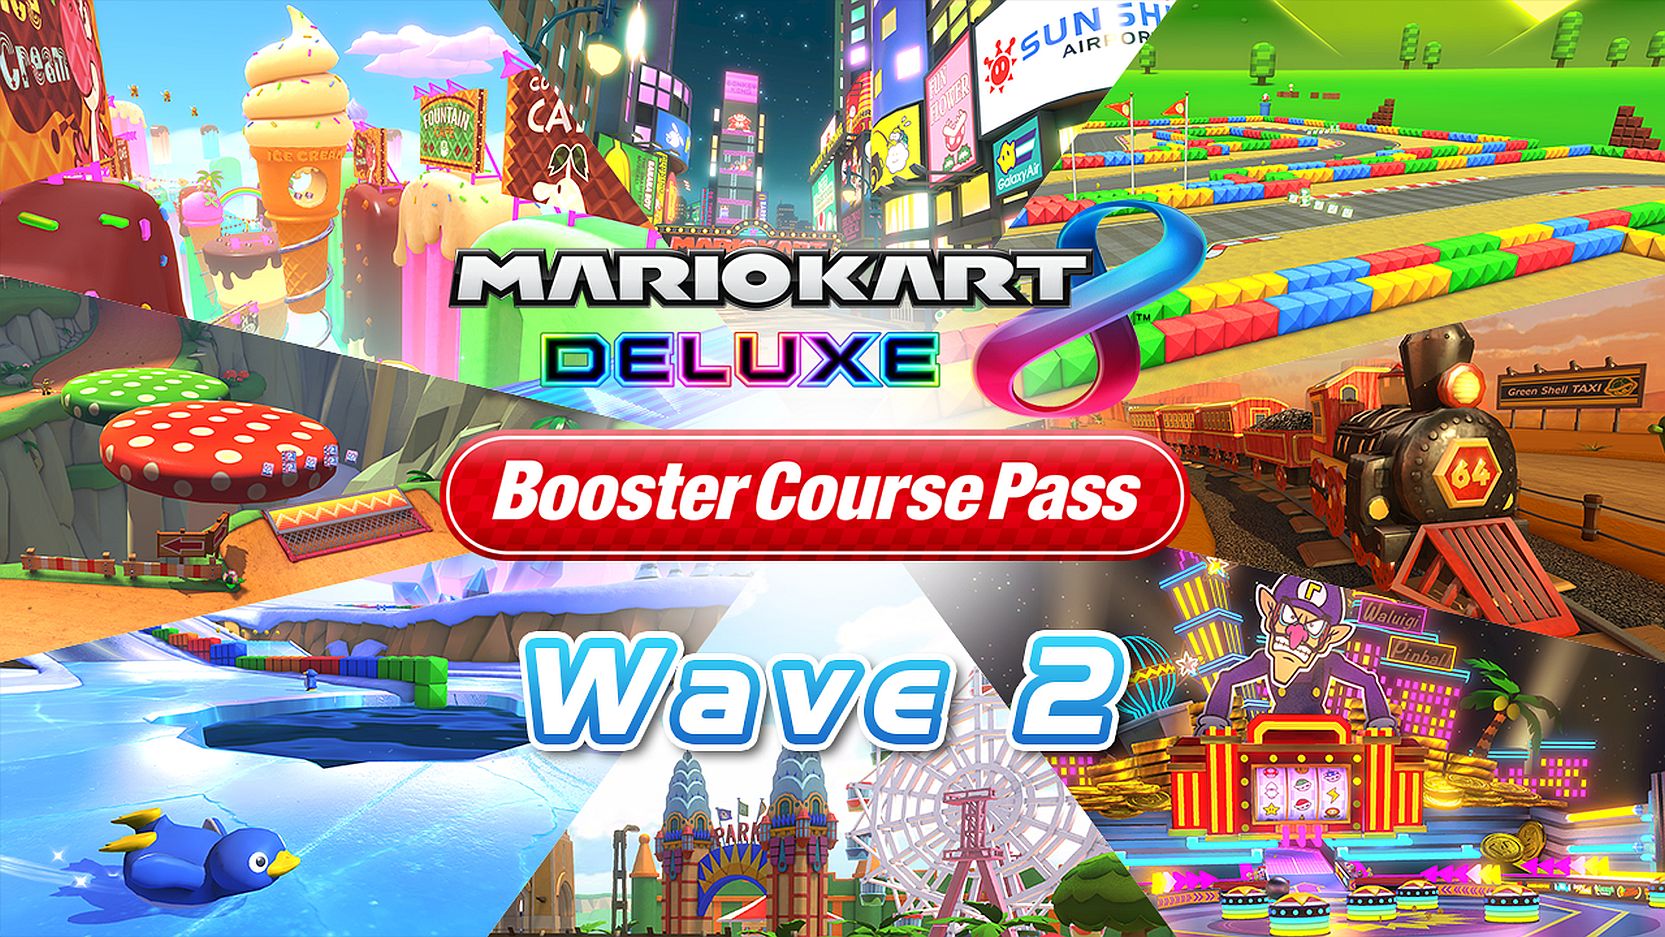 Image for Mario Kart 8 Deluxe Booster Course Pass Wave 2 will come hurtling around the corner very soon